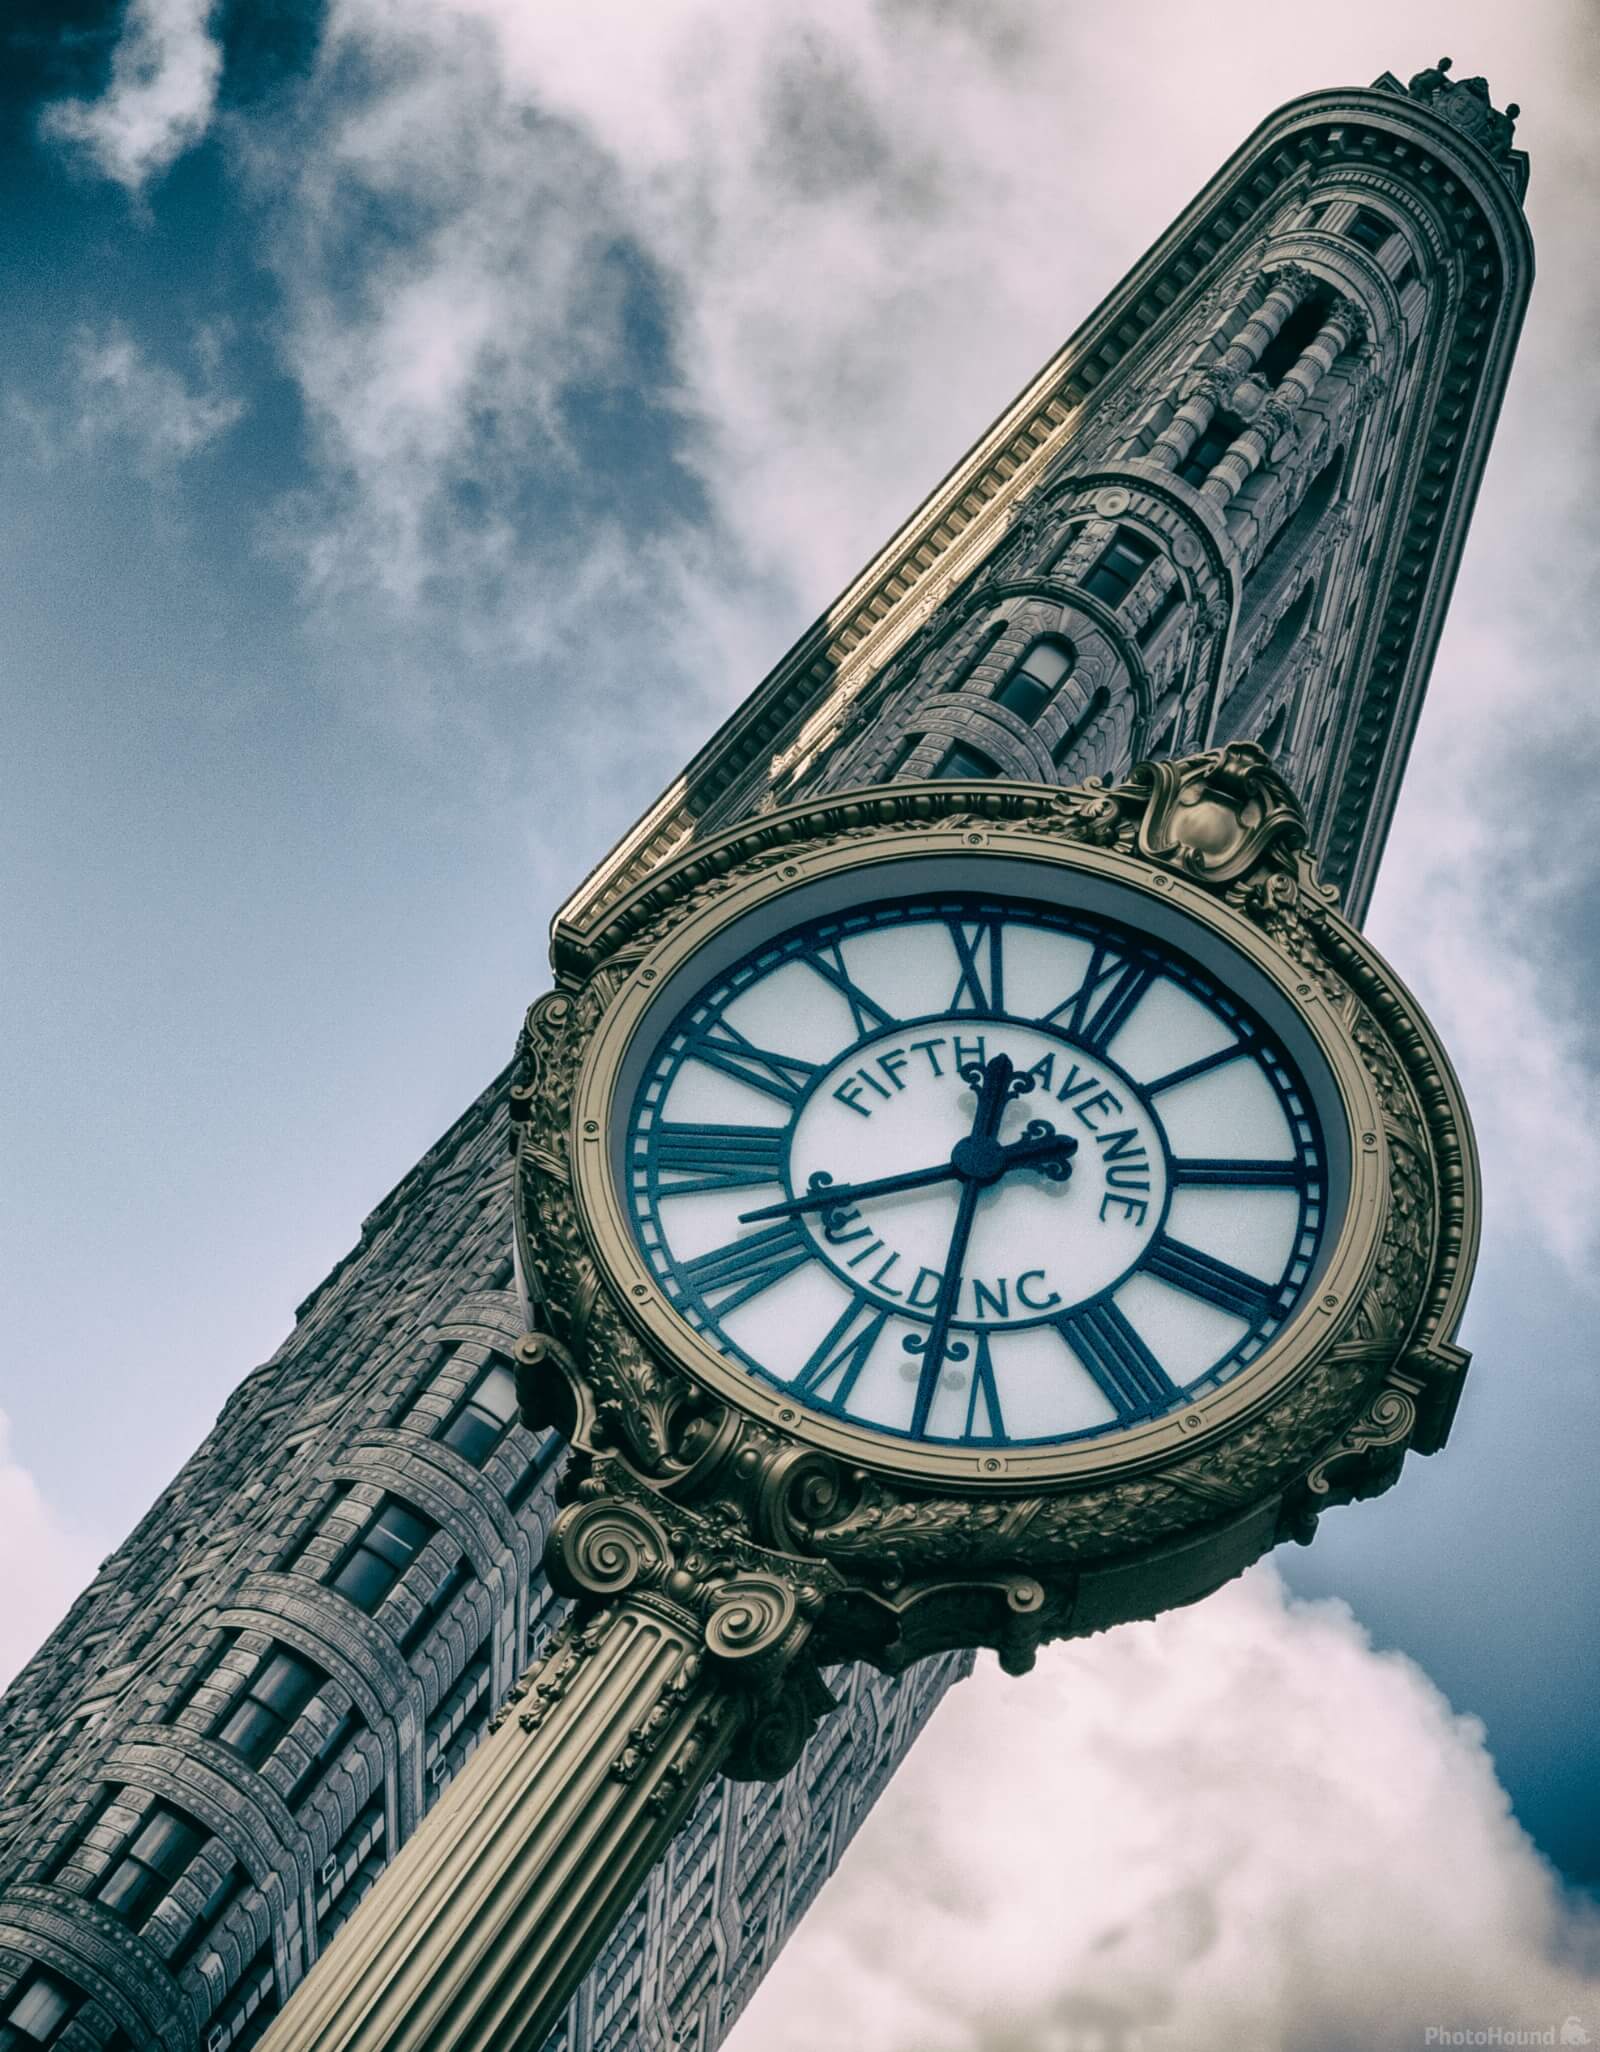 Image of Fifth Avenue Clock by Jeff Martin